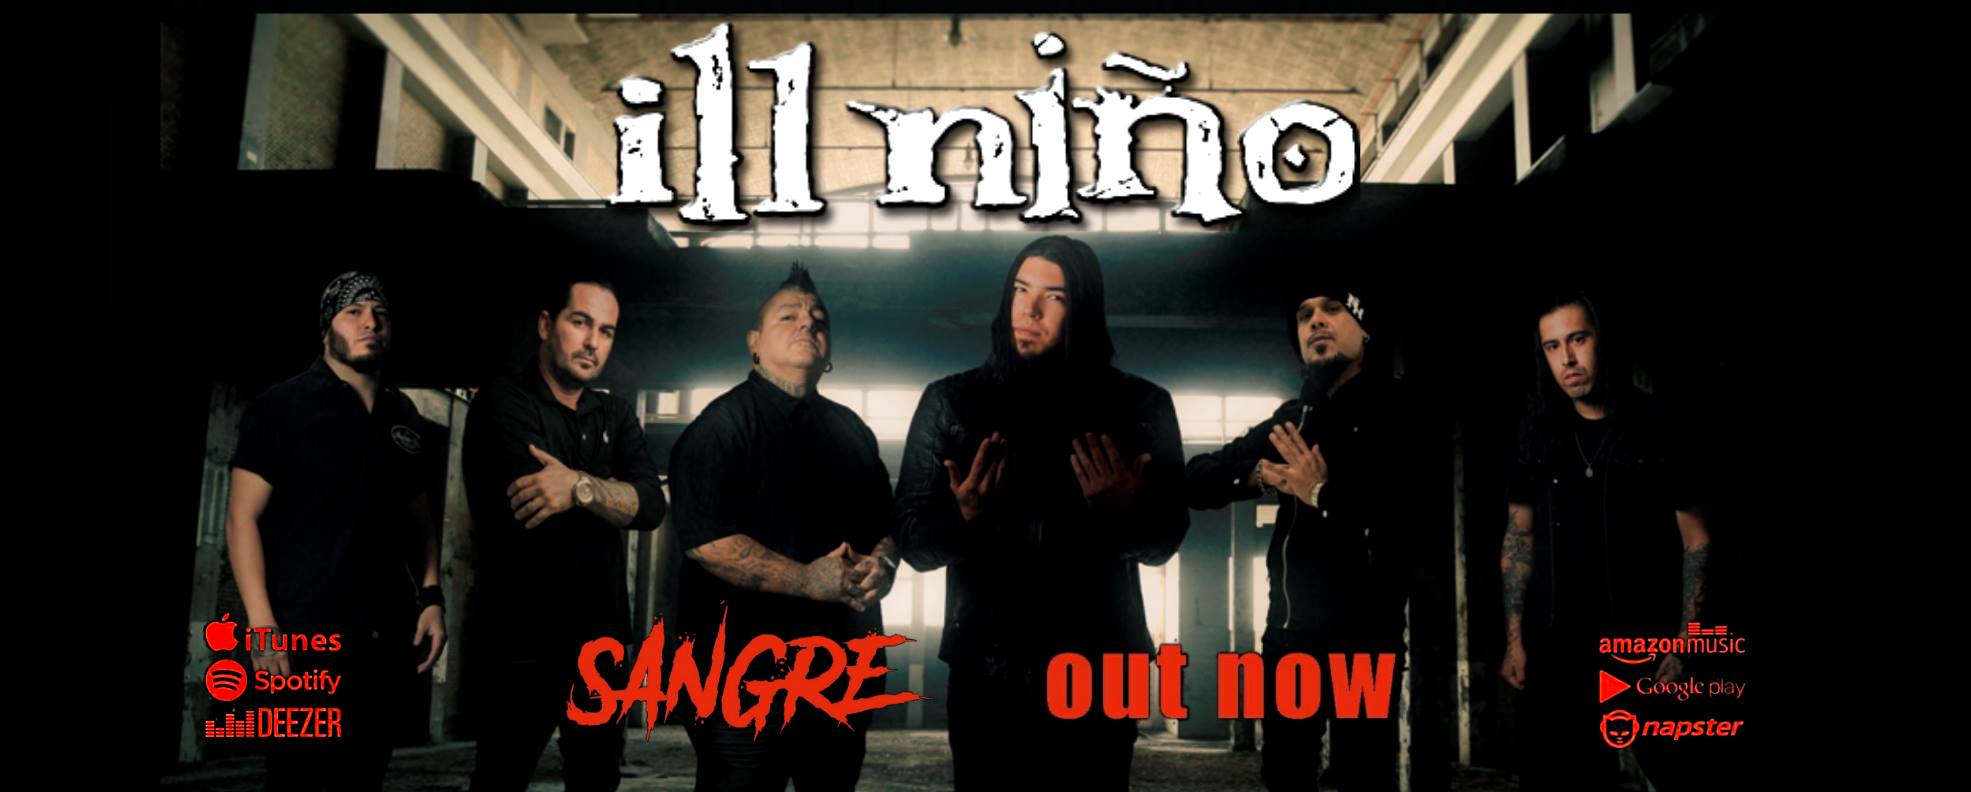 Ill Nino reveals new lineup, hear first new song in five years “Sangre”